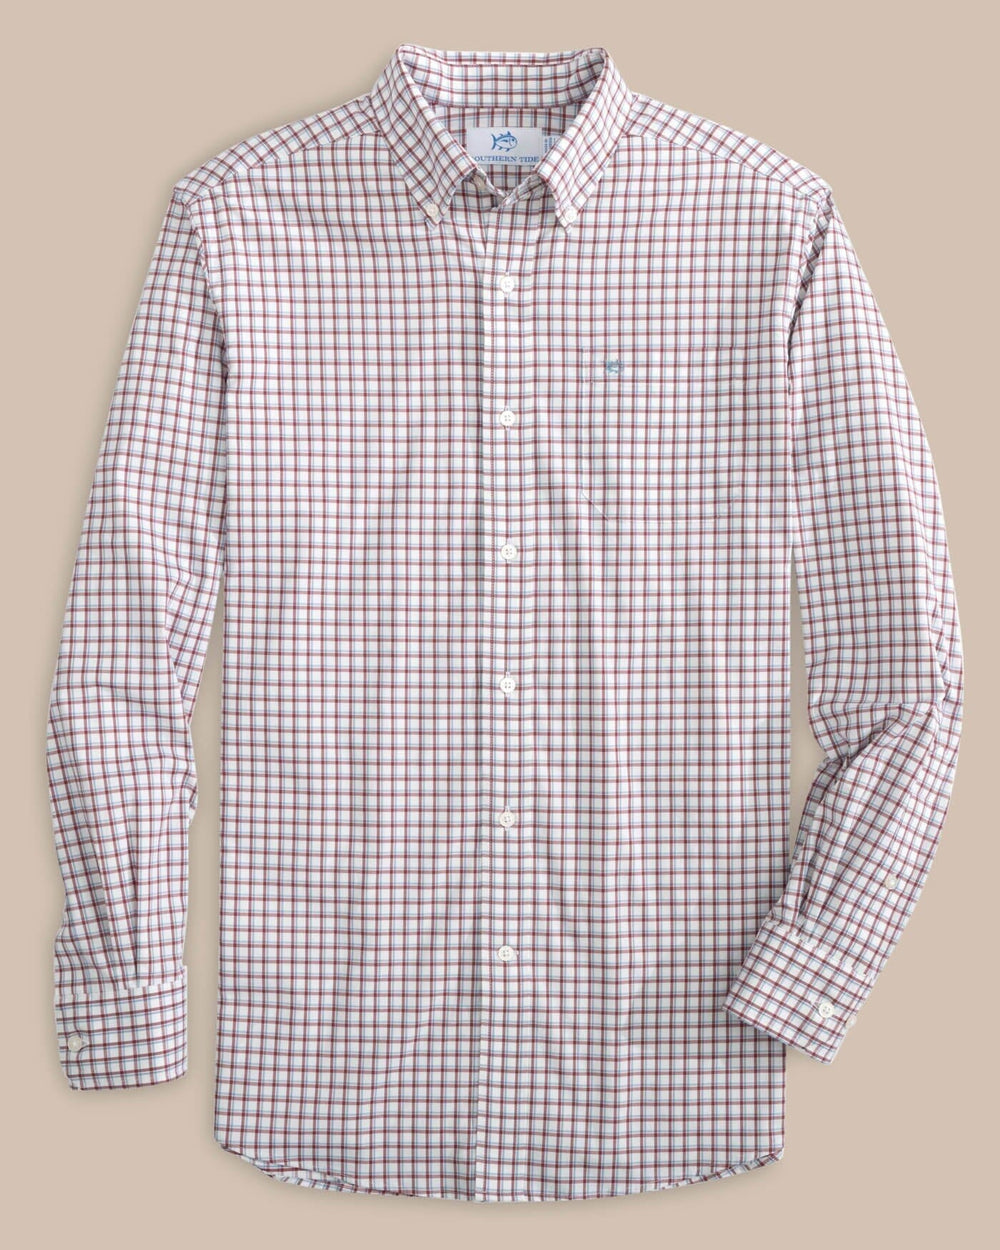 The front view of the Southern Tide Bellevue Plaid Sport Shirt by Southern Tide - Tuscany Red